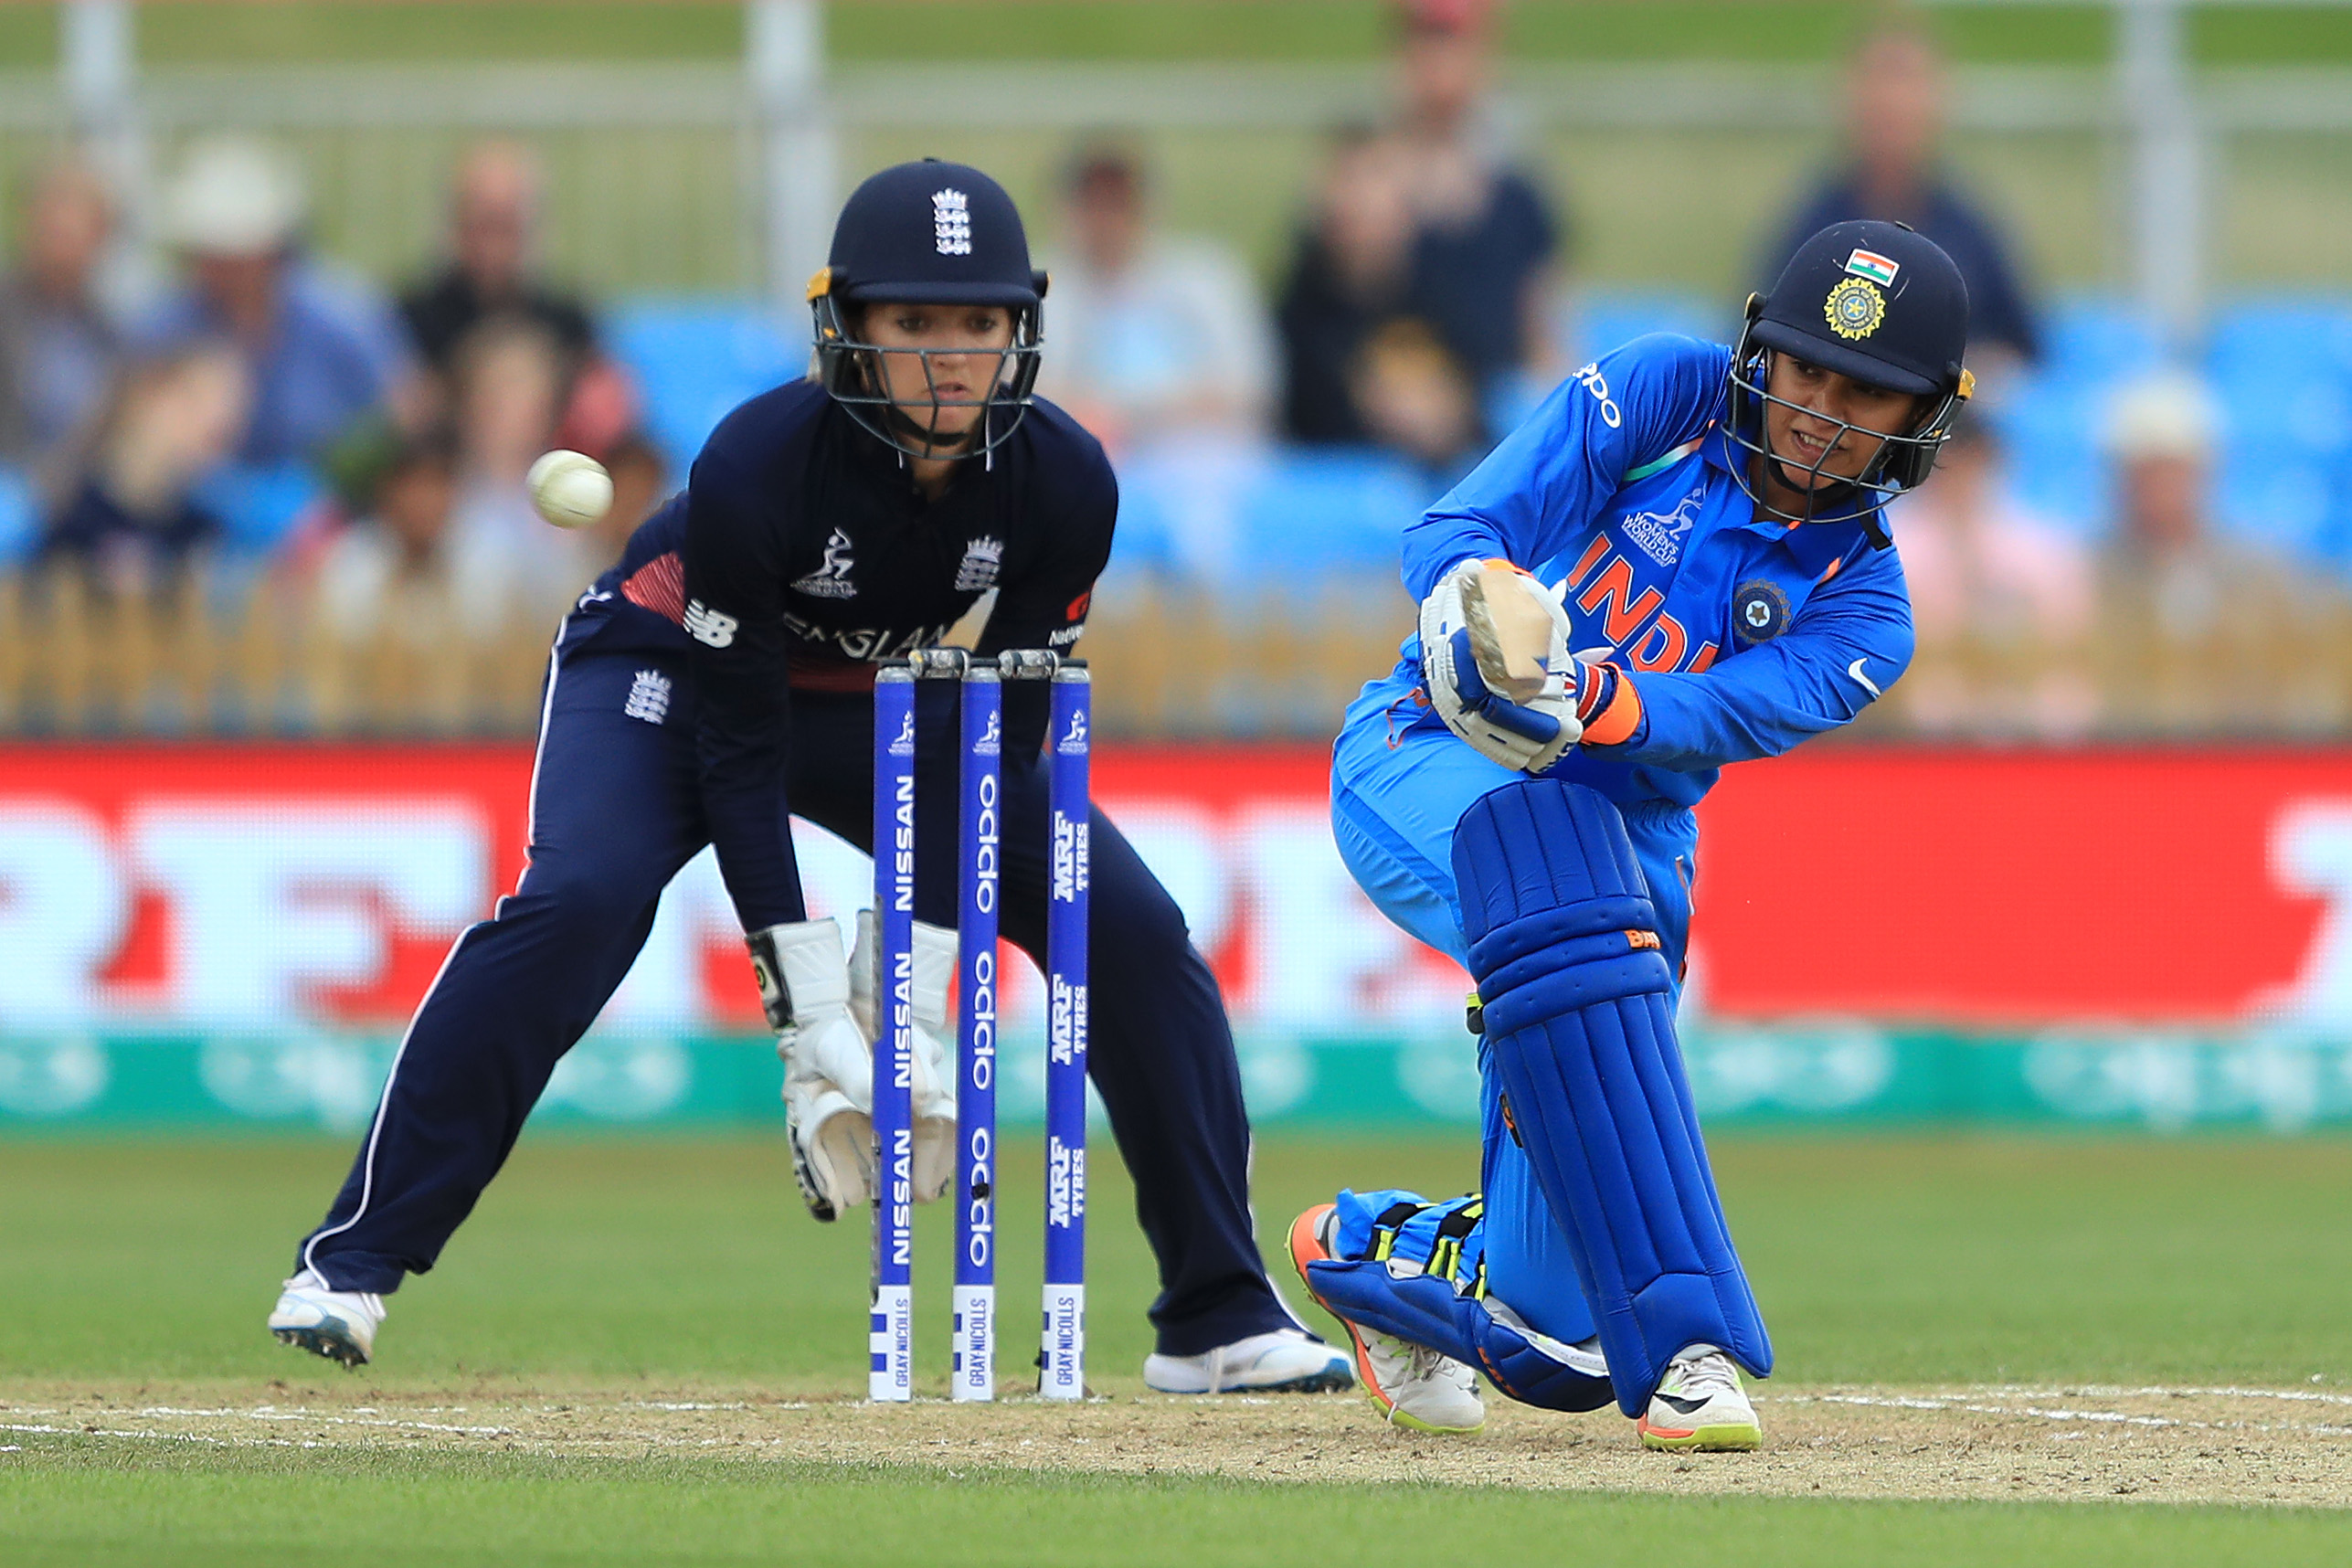 ICC Women’s World Cup | India kick-off their campaign with a comfortable win over England